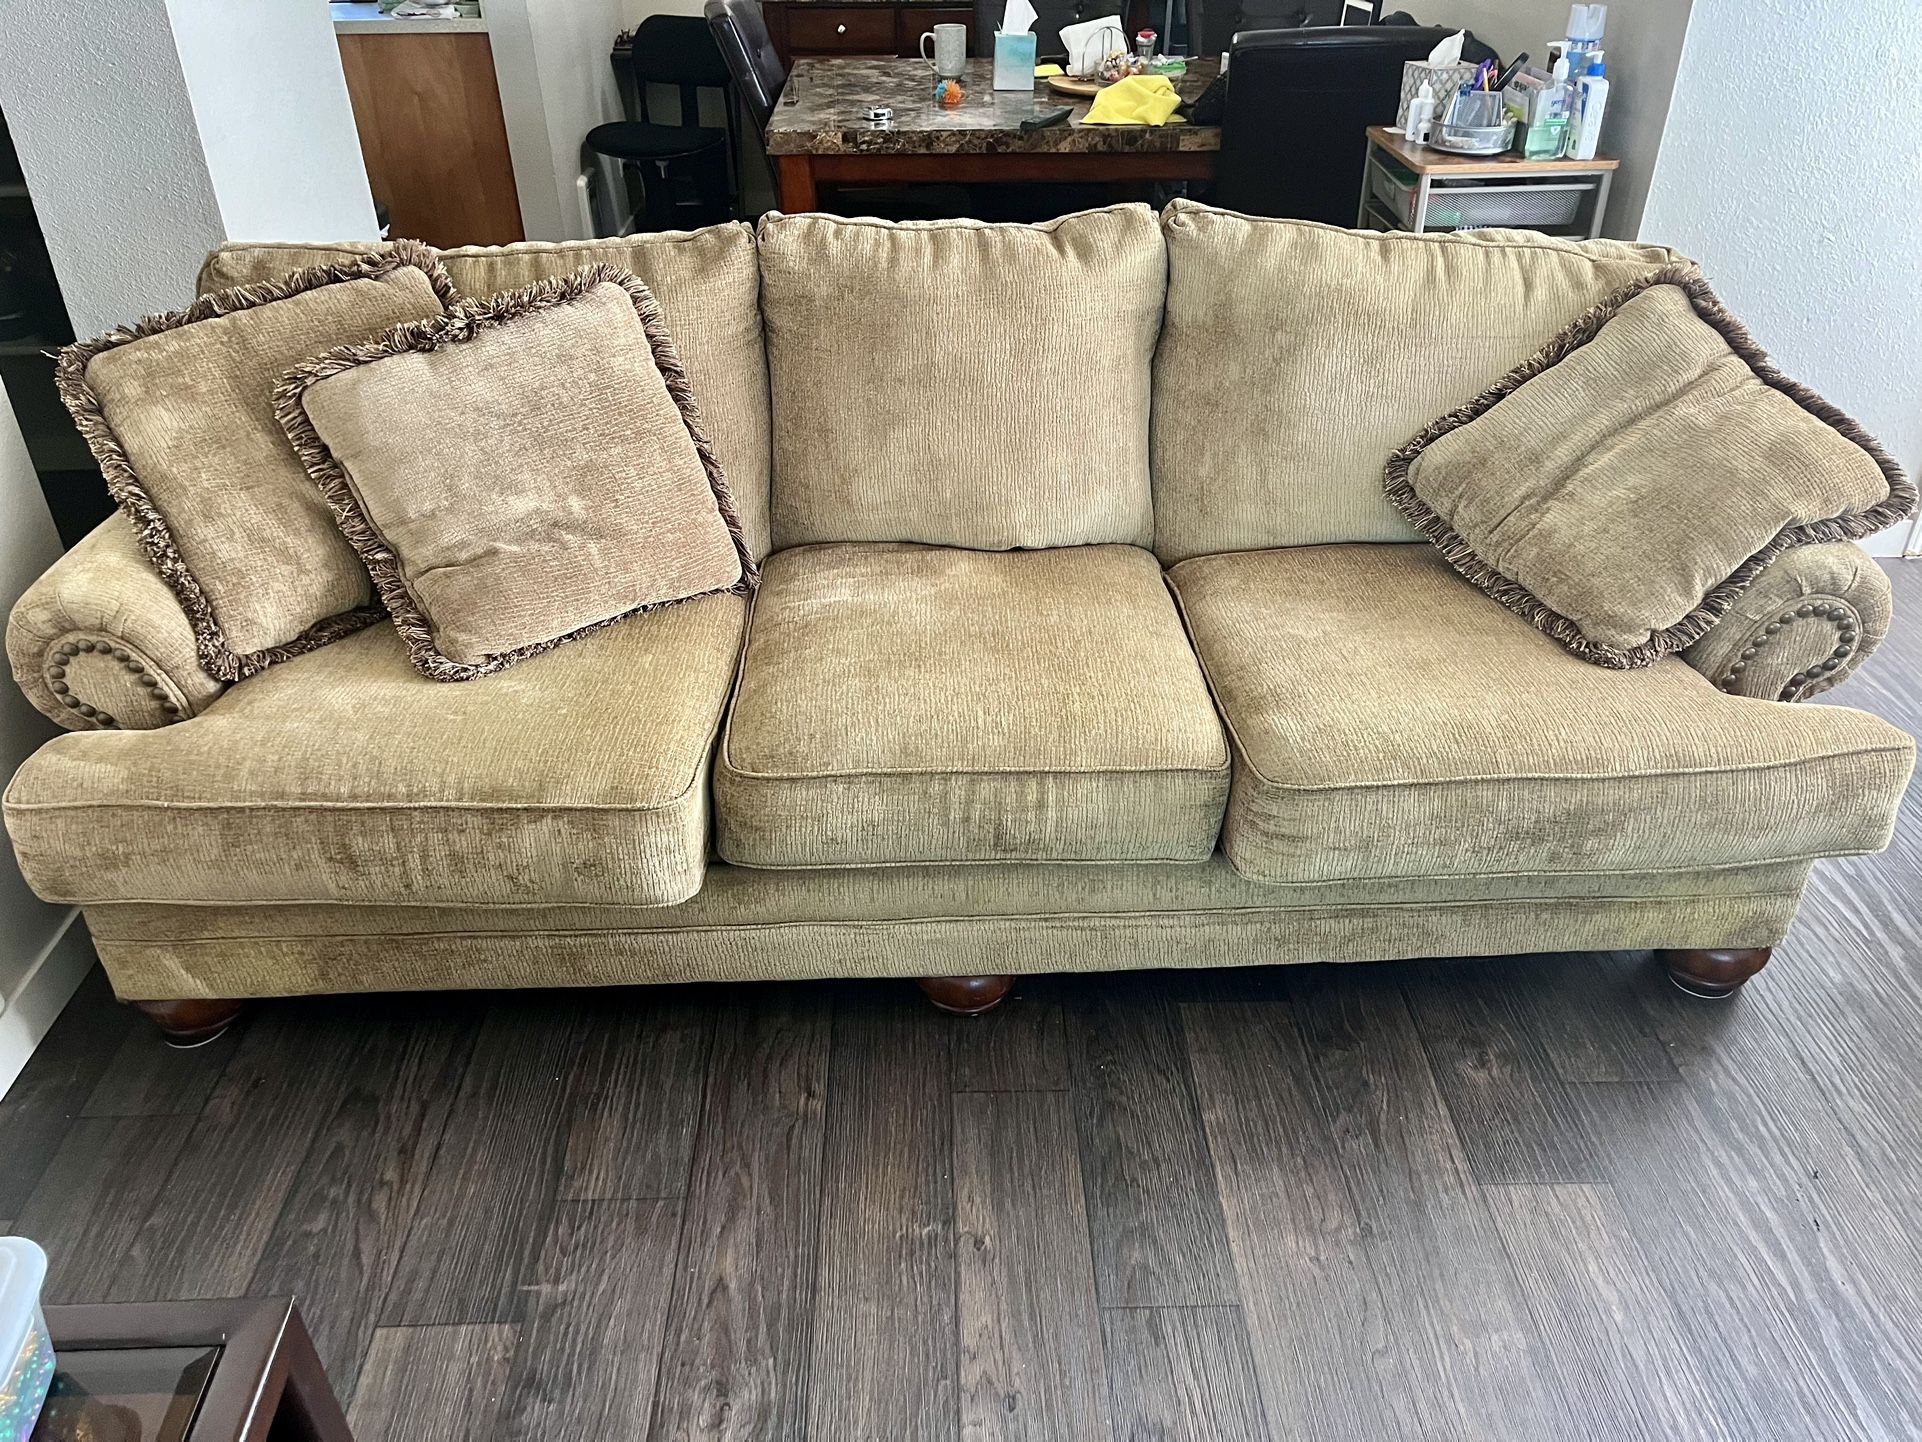 1 x Couch and Armchair with Ottoman